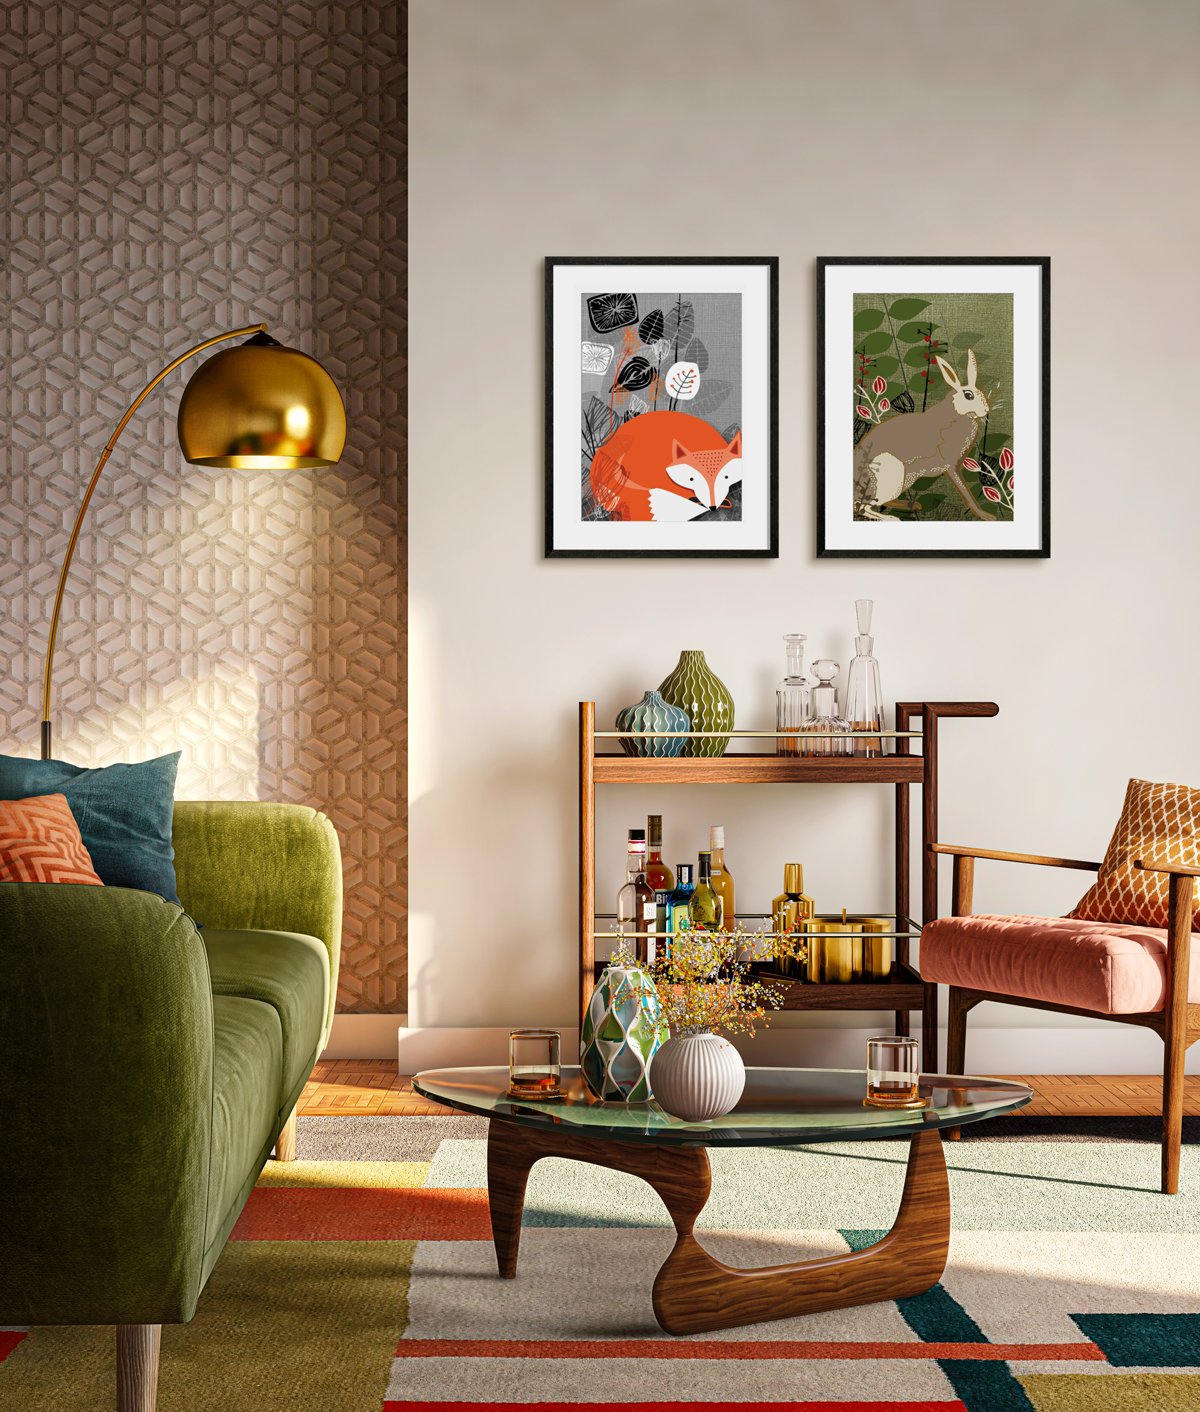 Mid-century living room with animal art hung above a bar cart